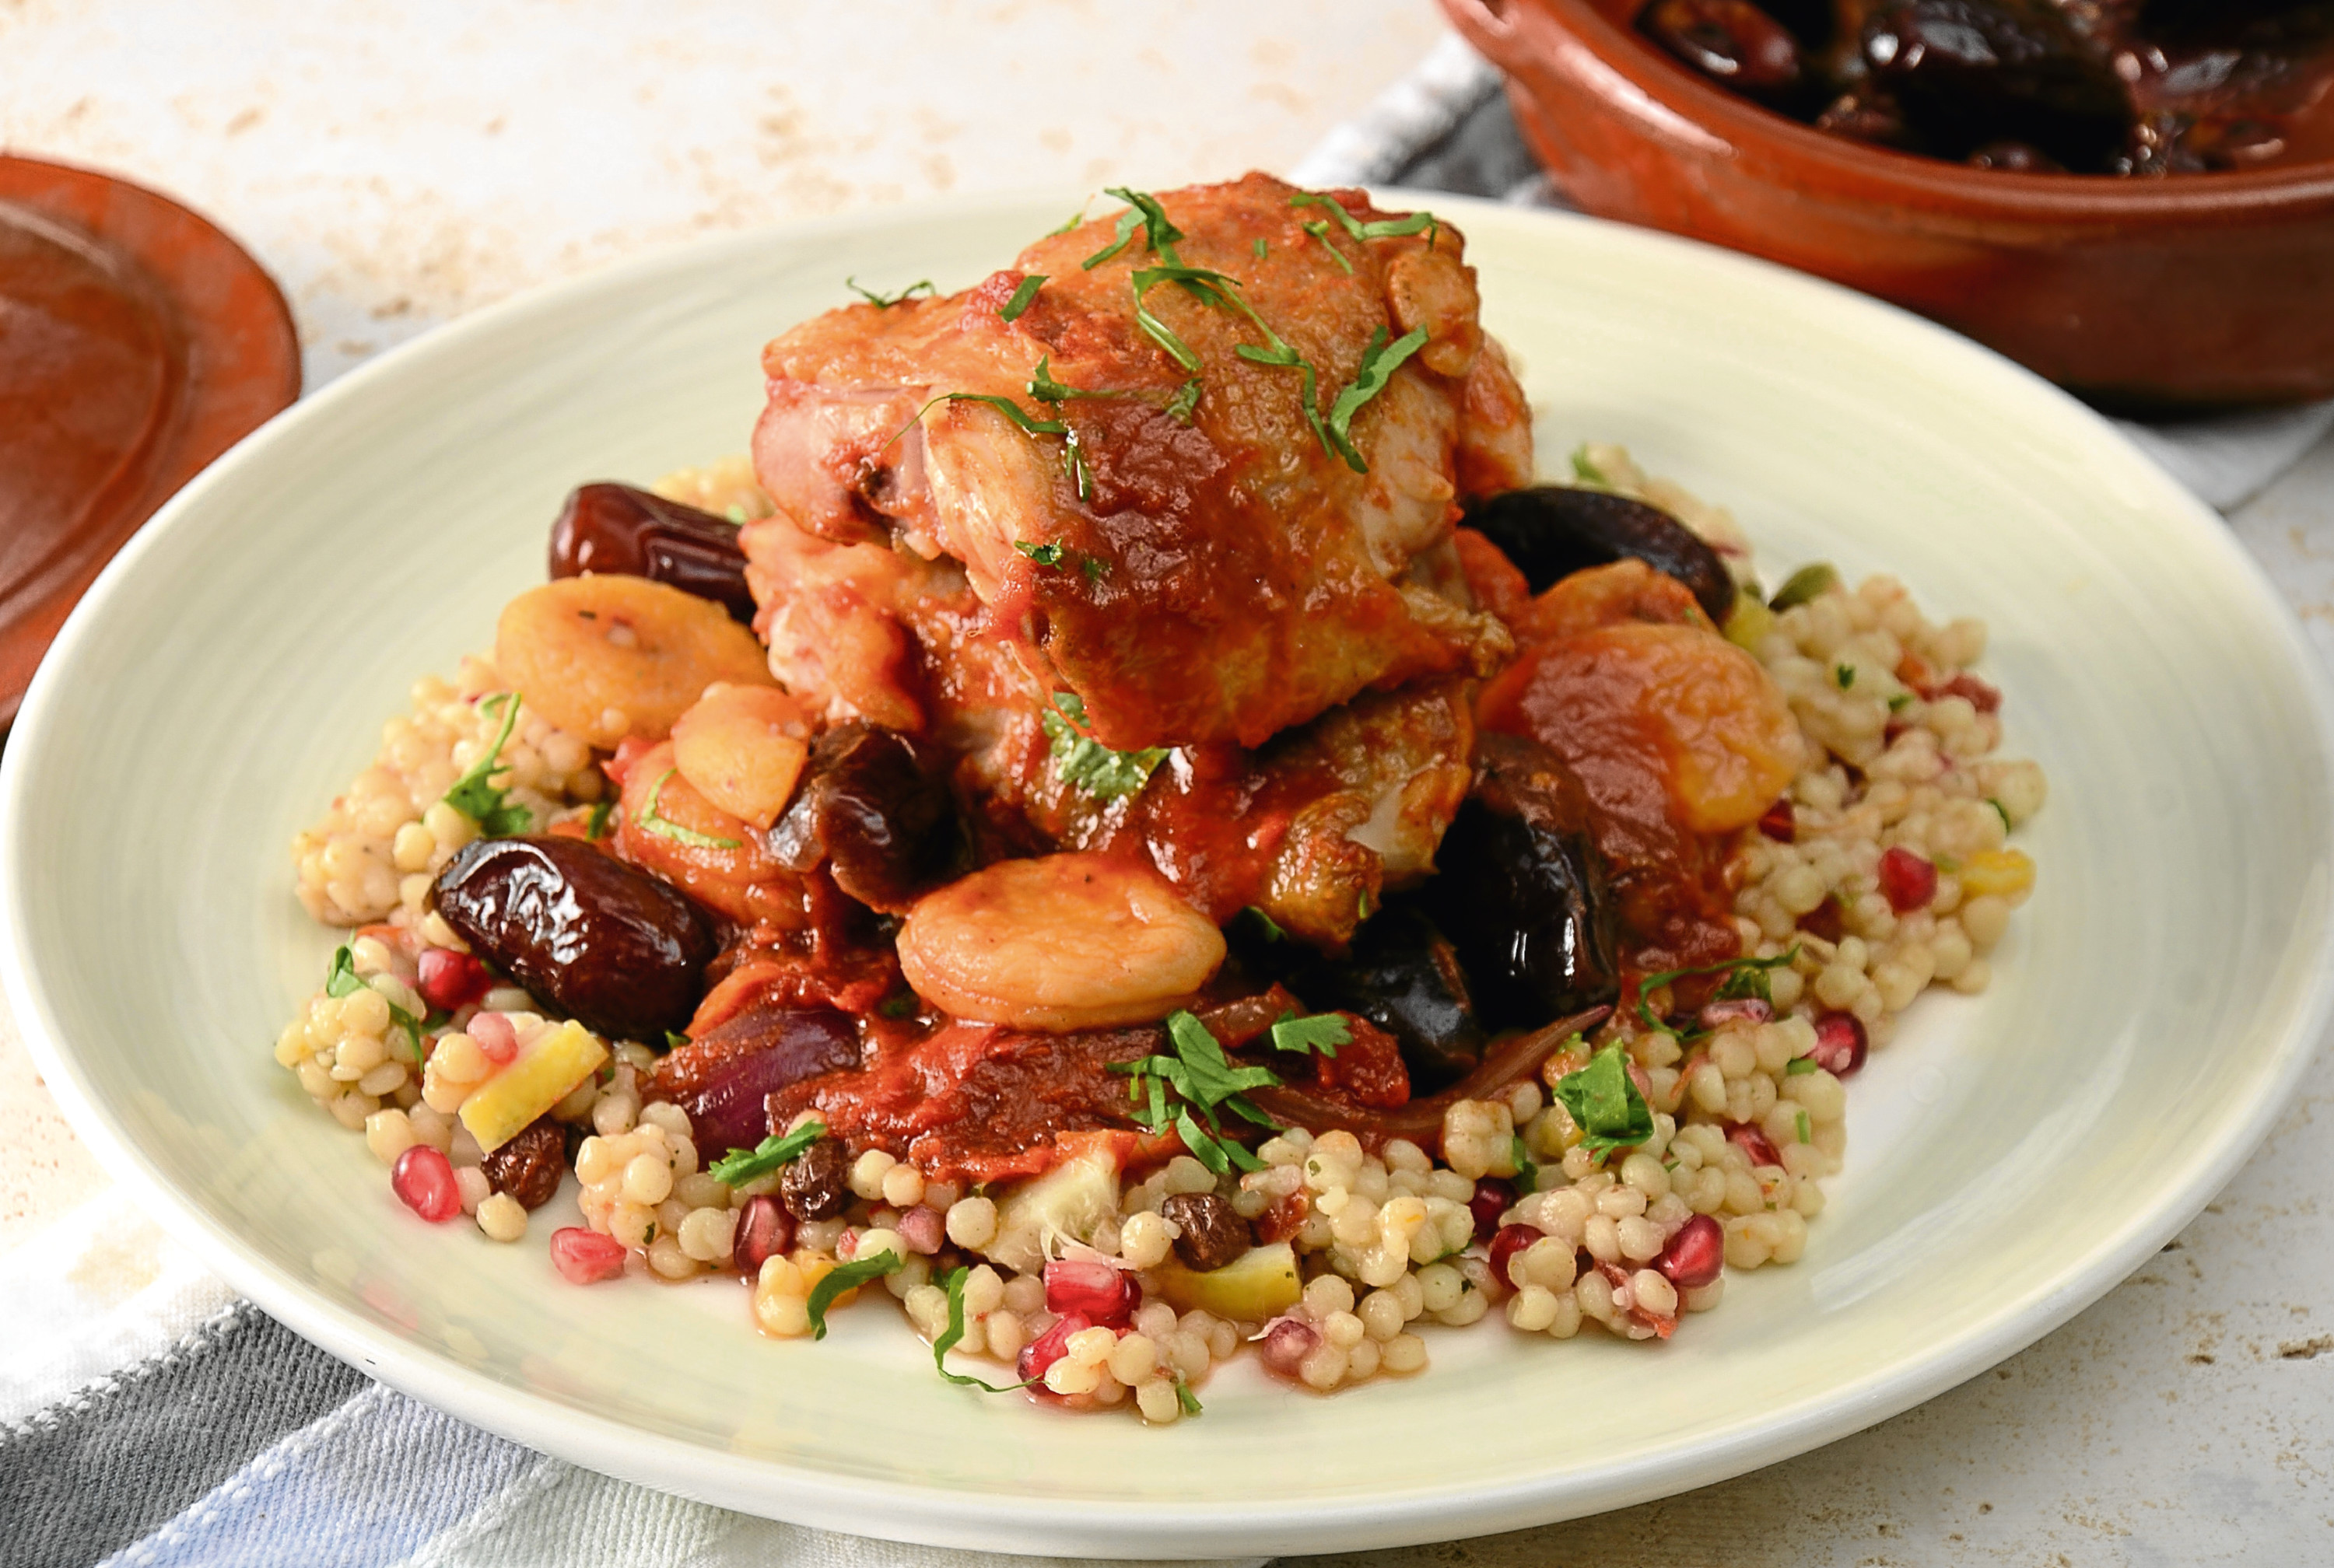 This week's delicious chicken tagine recipe